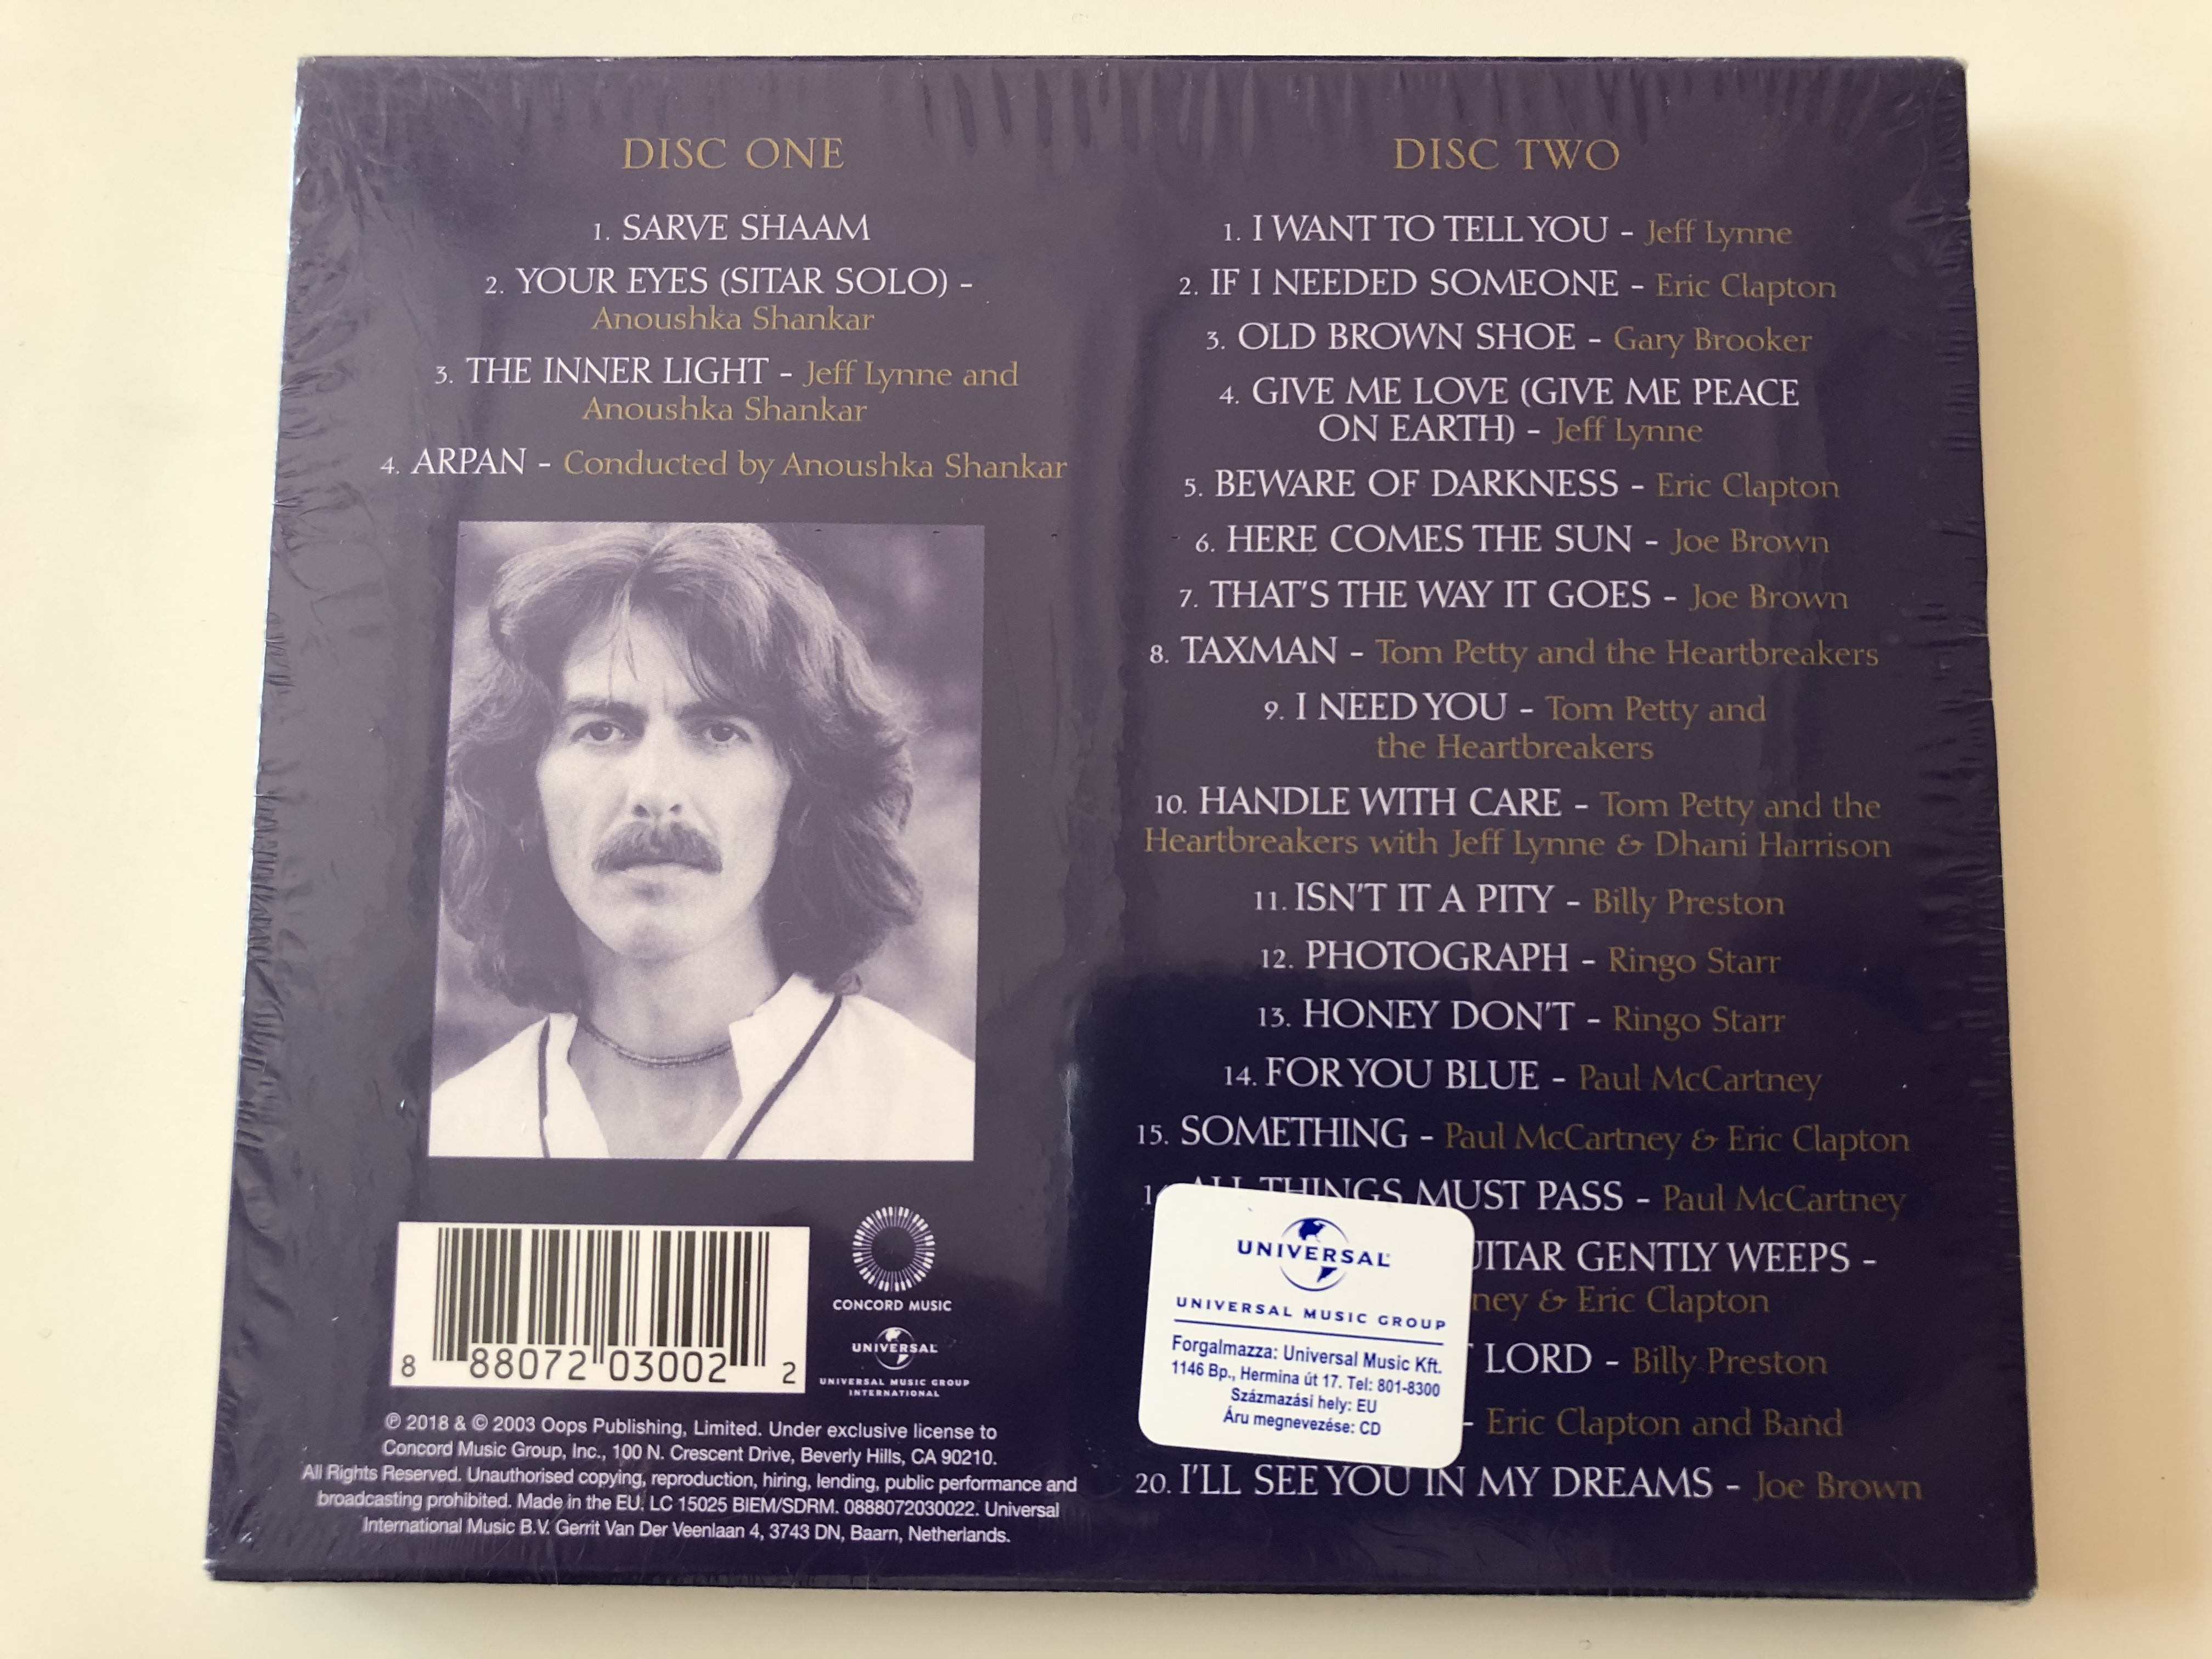 concert-for-george-celebrating-the-life-and-music-of-george-harrison-with-performances-by-eric-clapton-jeff-lynne-paul-mccartney-tom-petty-monty-python-ravi-anoushka-shankar-and-ringo-s.jpg